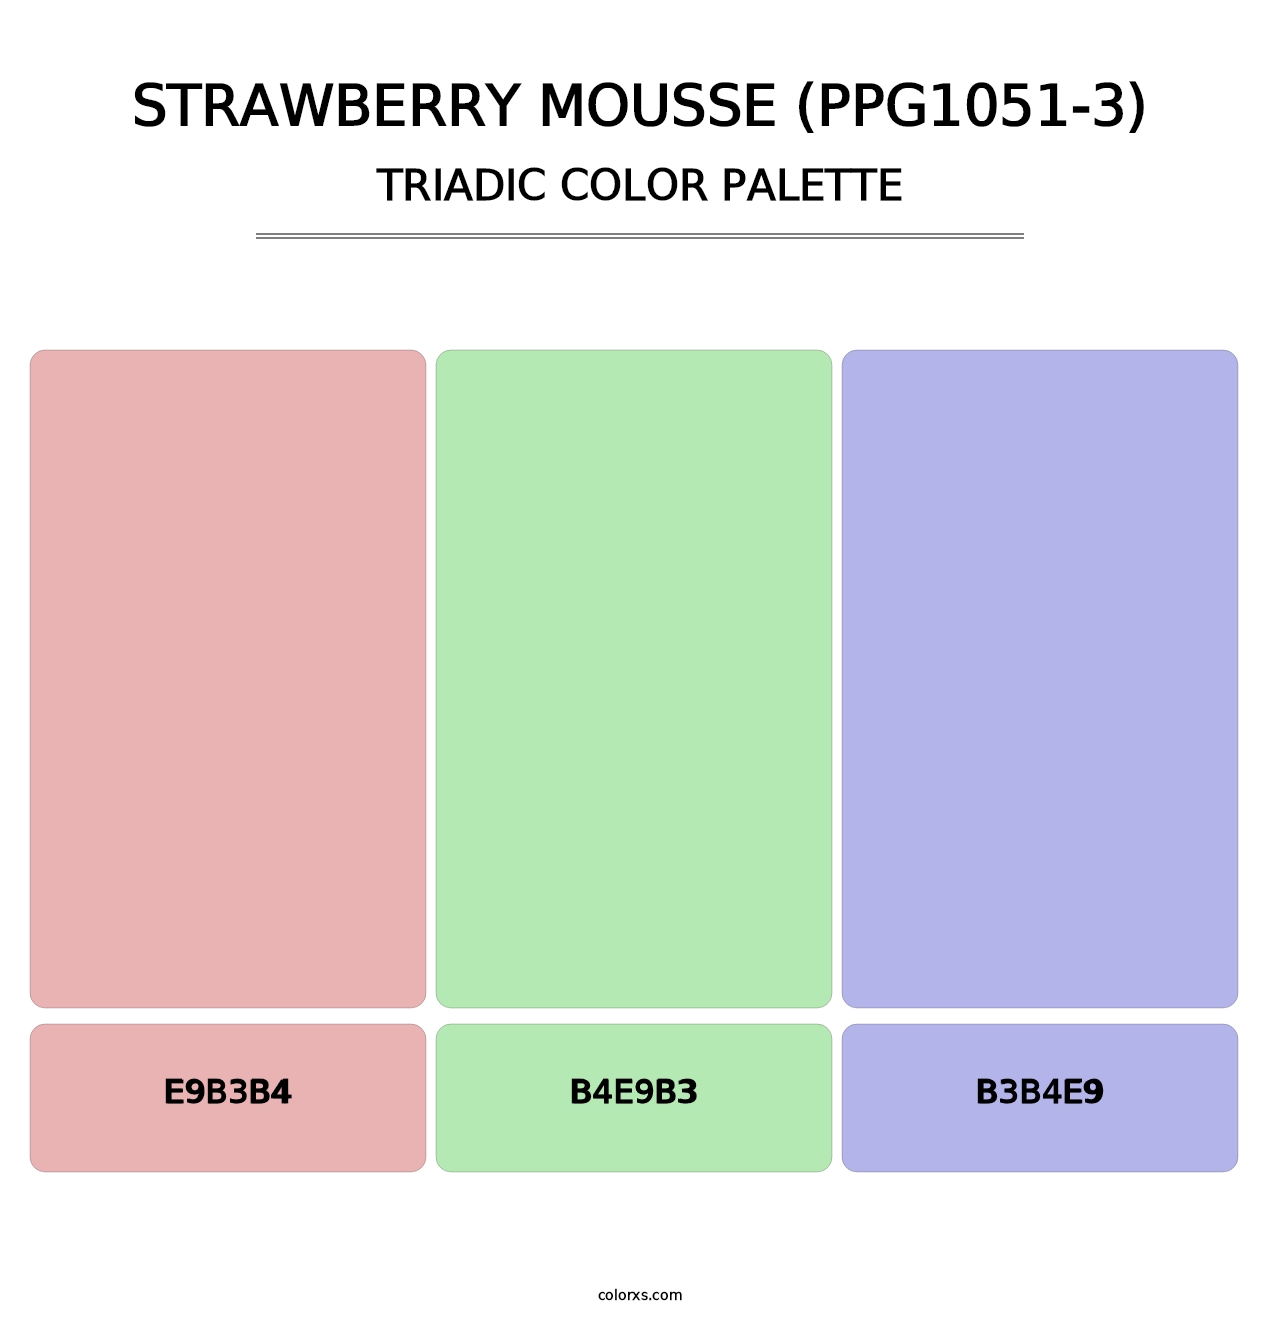 Strawberry Mousse (PPG1051-3) - Triadic Color Palette